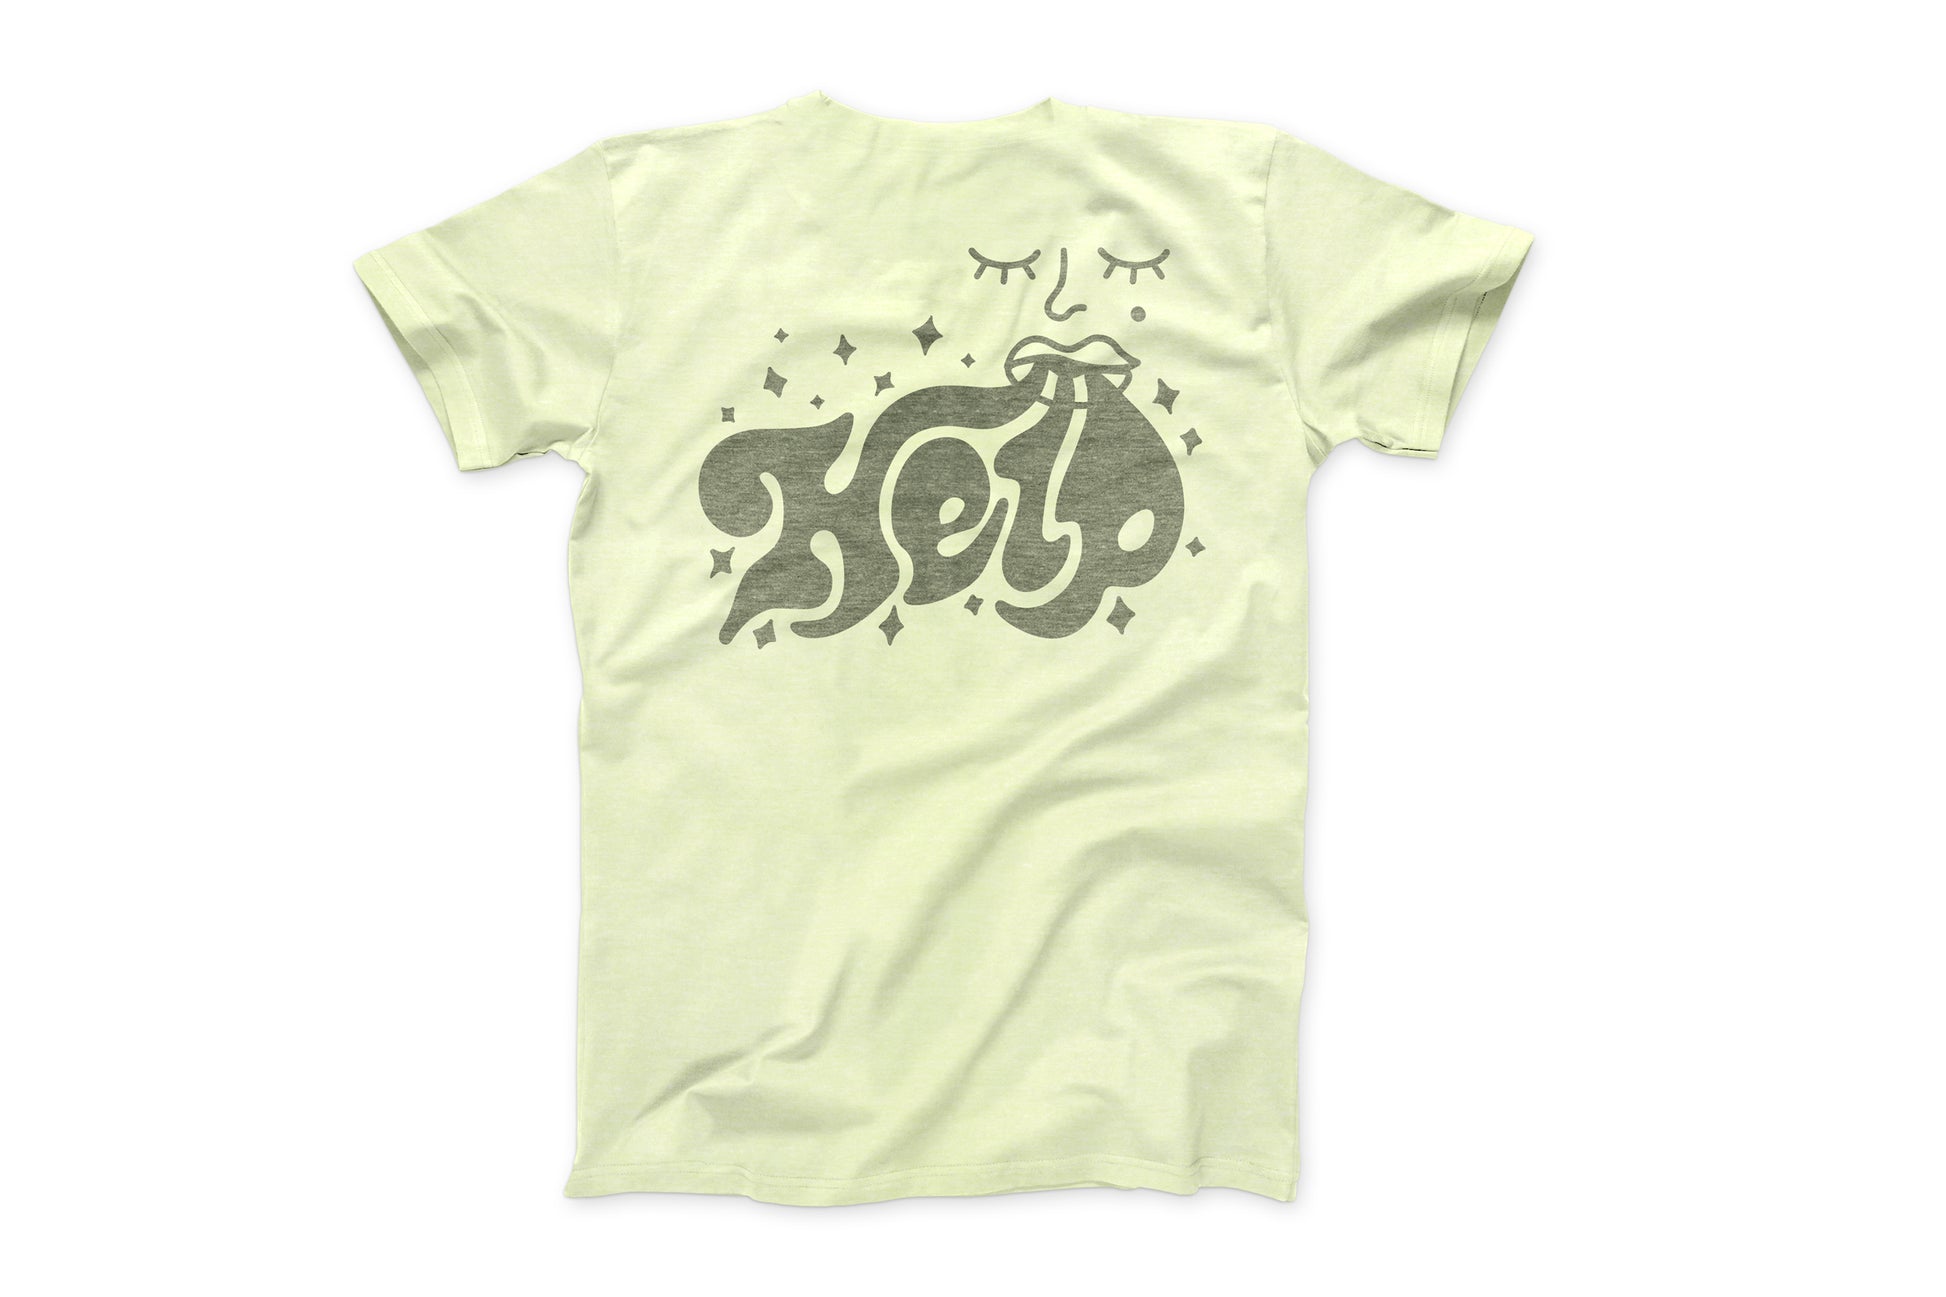 This is a photo of the back of the "Daily Tee". The shirt is a light pale green and has a large design on it. The design is of a mouth exhaling the word "HELP" which is in a art nouveau style. Small stars surround the design.